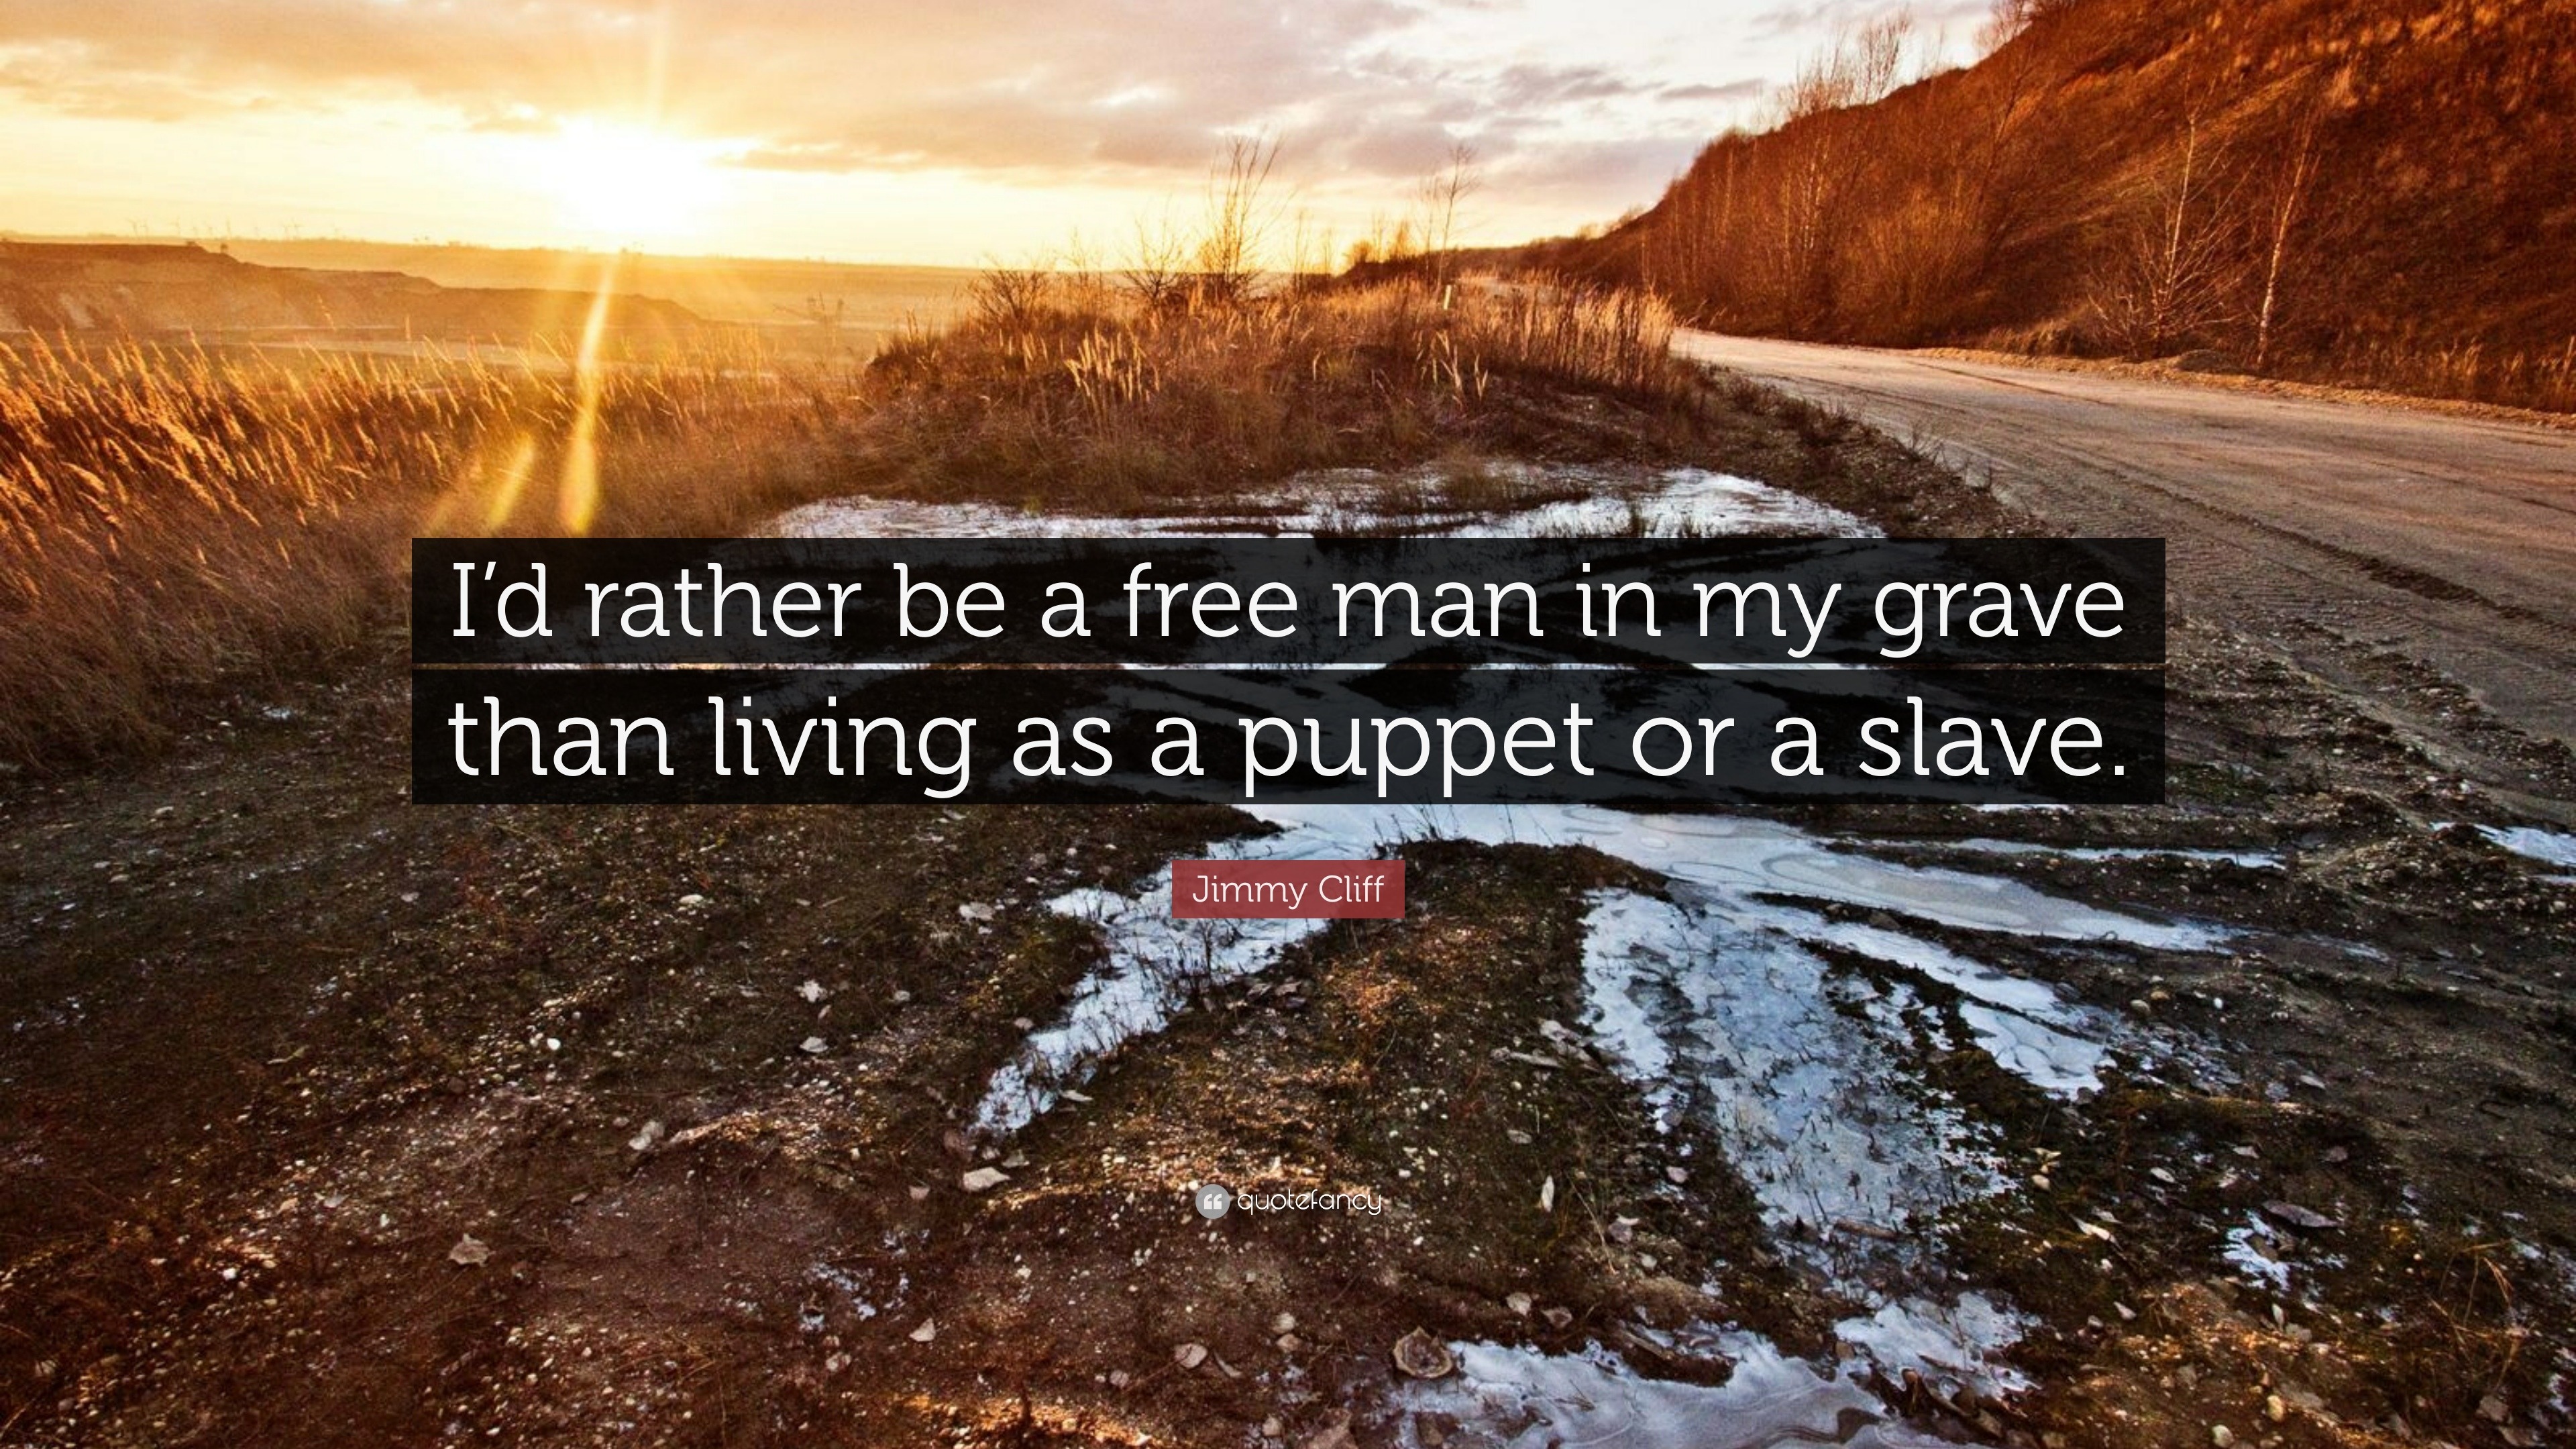 Jimmy Cliff Quote: “I’d rather be a free man in my grave than living as ...